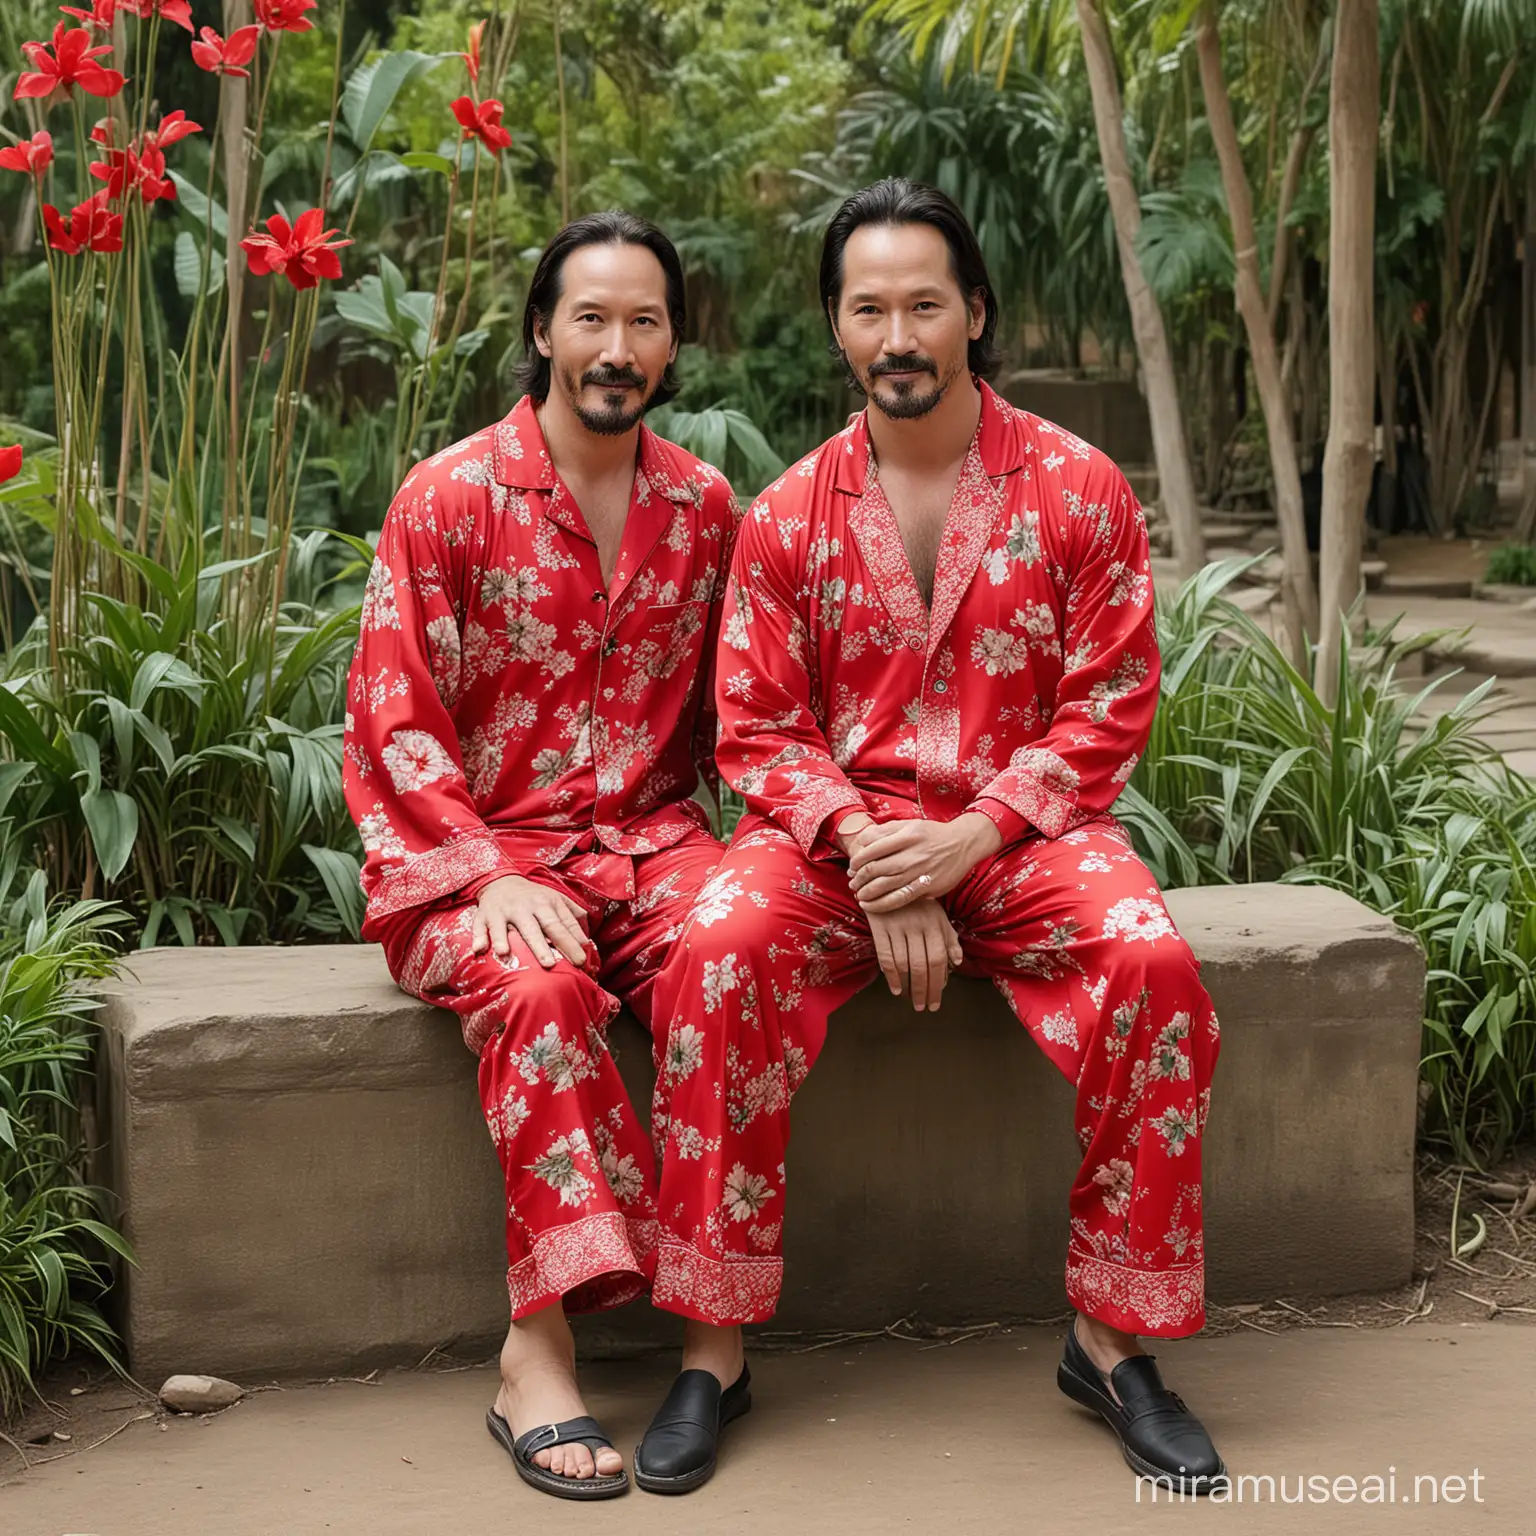 50 year old Indonesian man, standing with Keanu Reeves, dressed in red floral pajamas who is sitting
   at the zoo park.